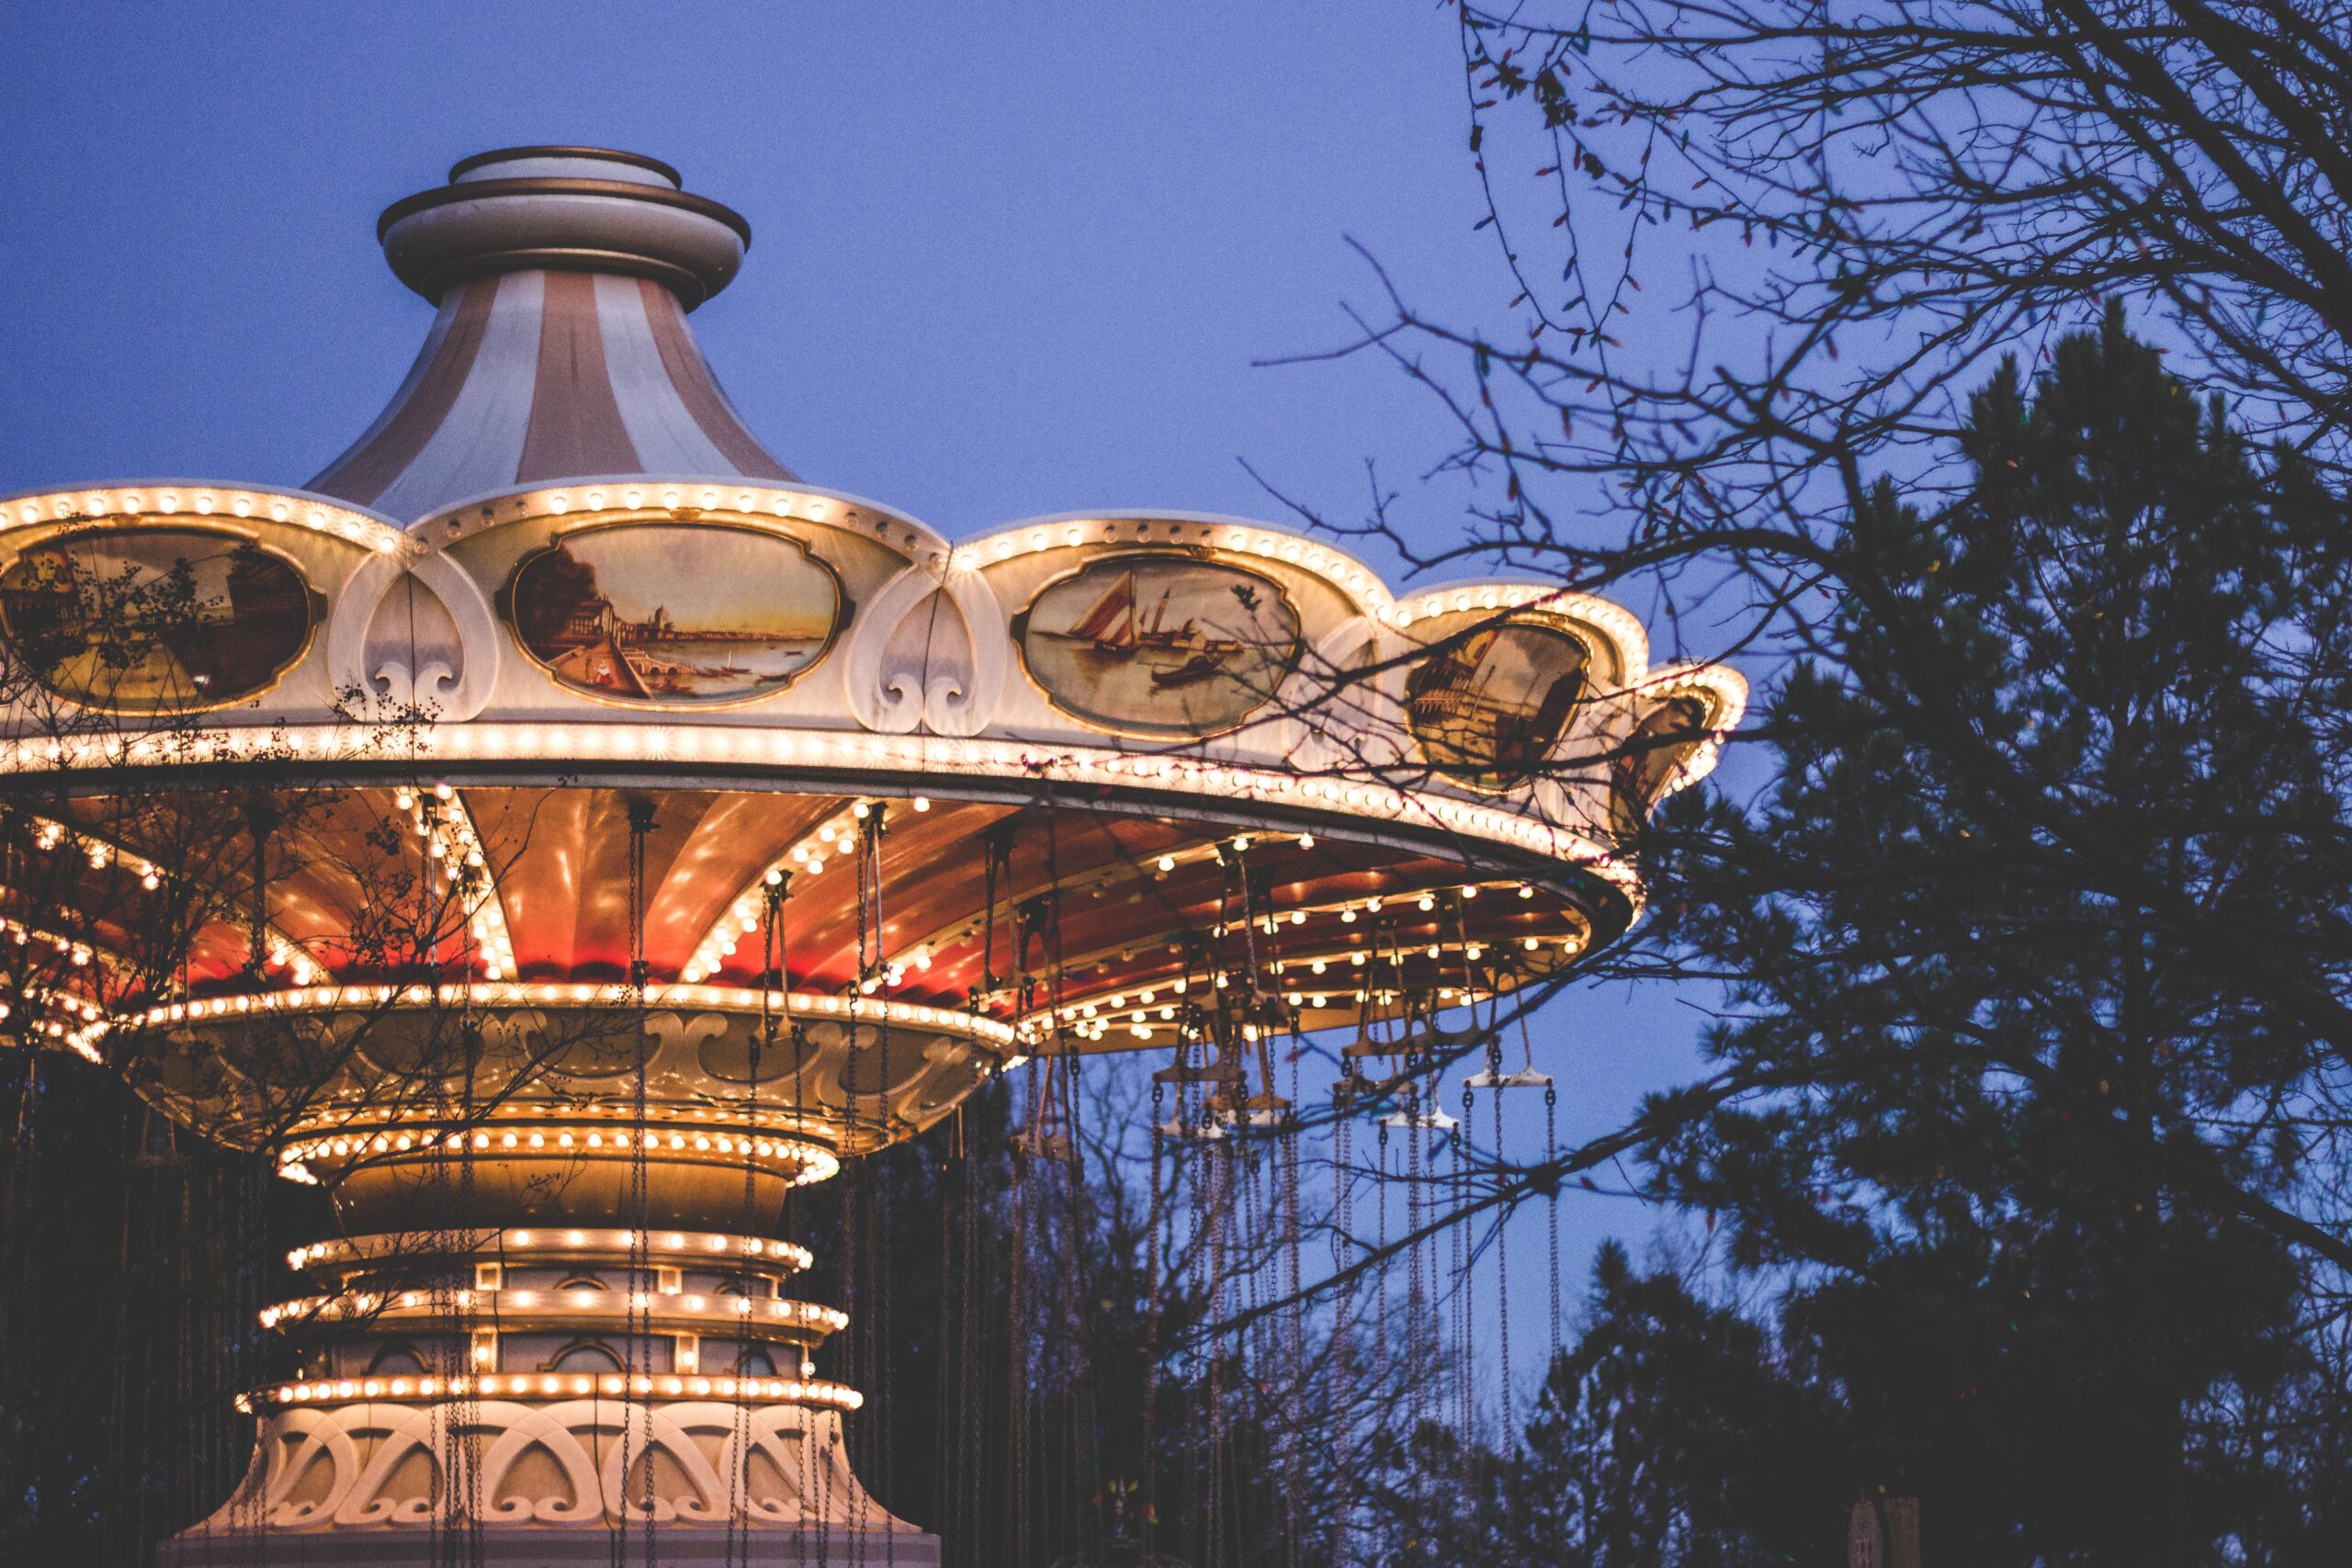 Silver Dollar City is festive amusement park in the fall and winter months. 
Pictured: a carousel at the Silver Dollar City theme park lit up at night